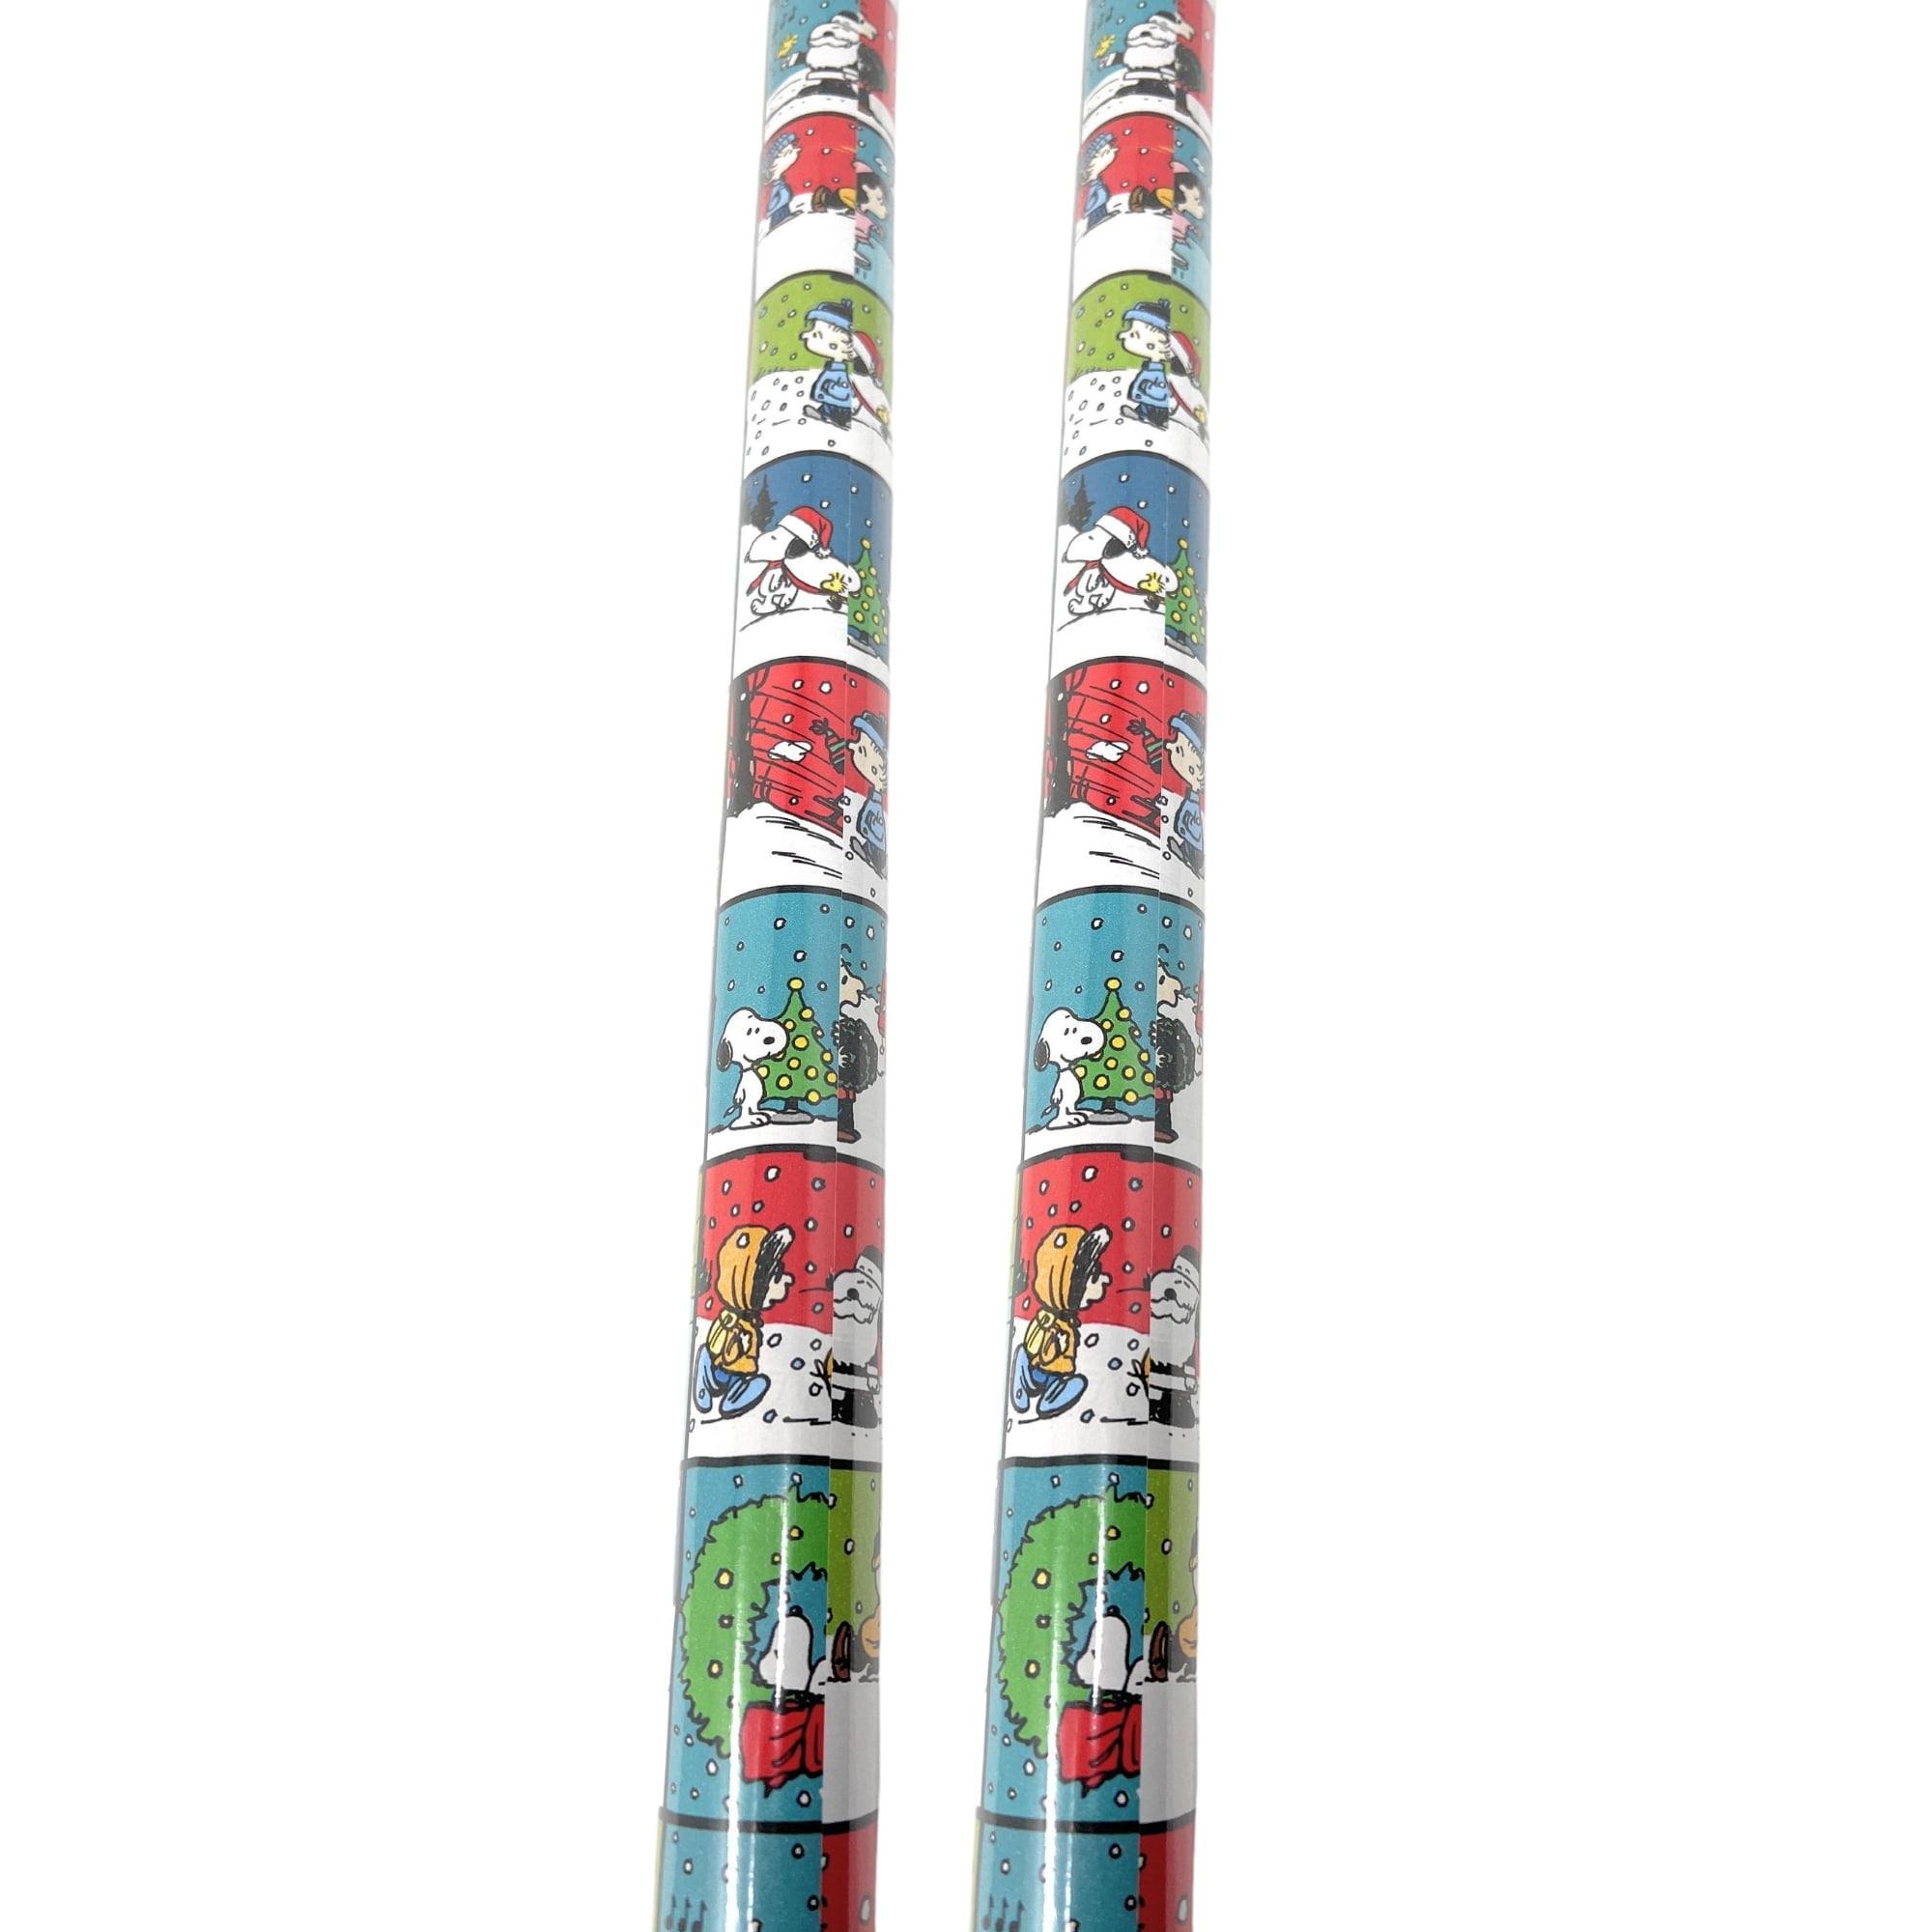 Peanuts® Snoopy Happy Birthday Wrapping Paper, 17.5 sq. ft.